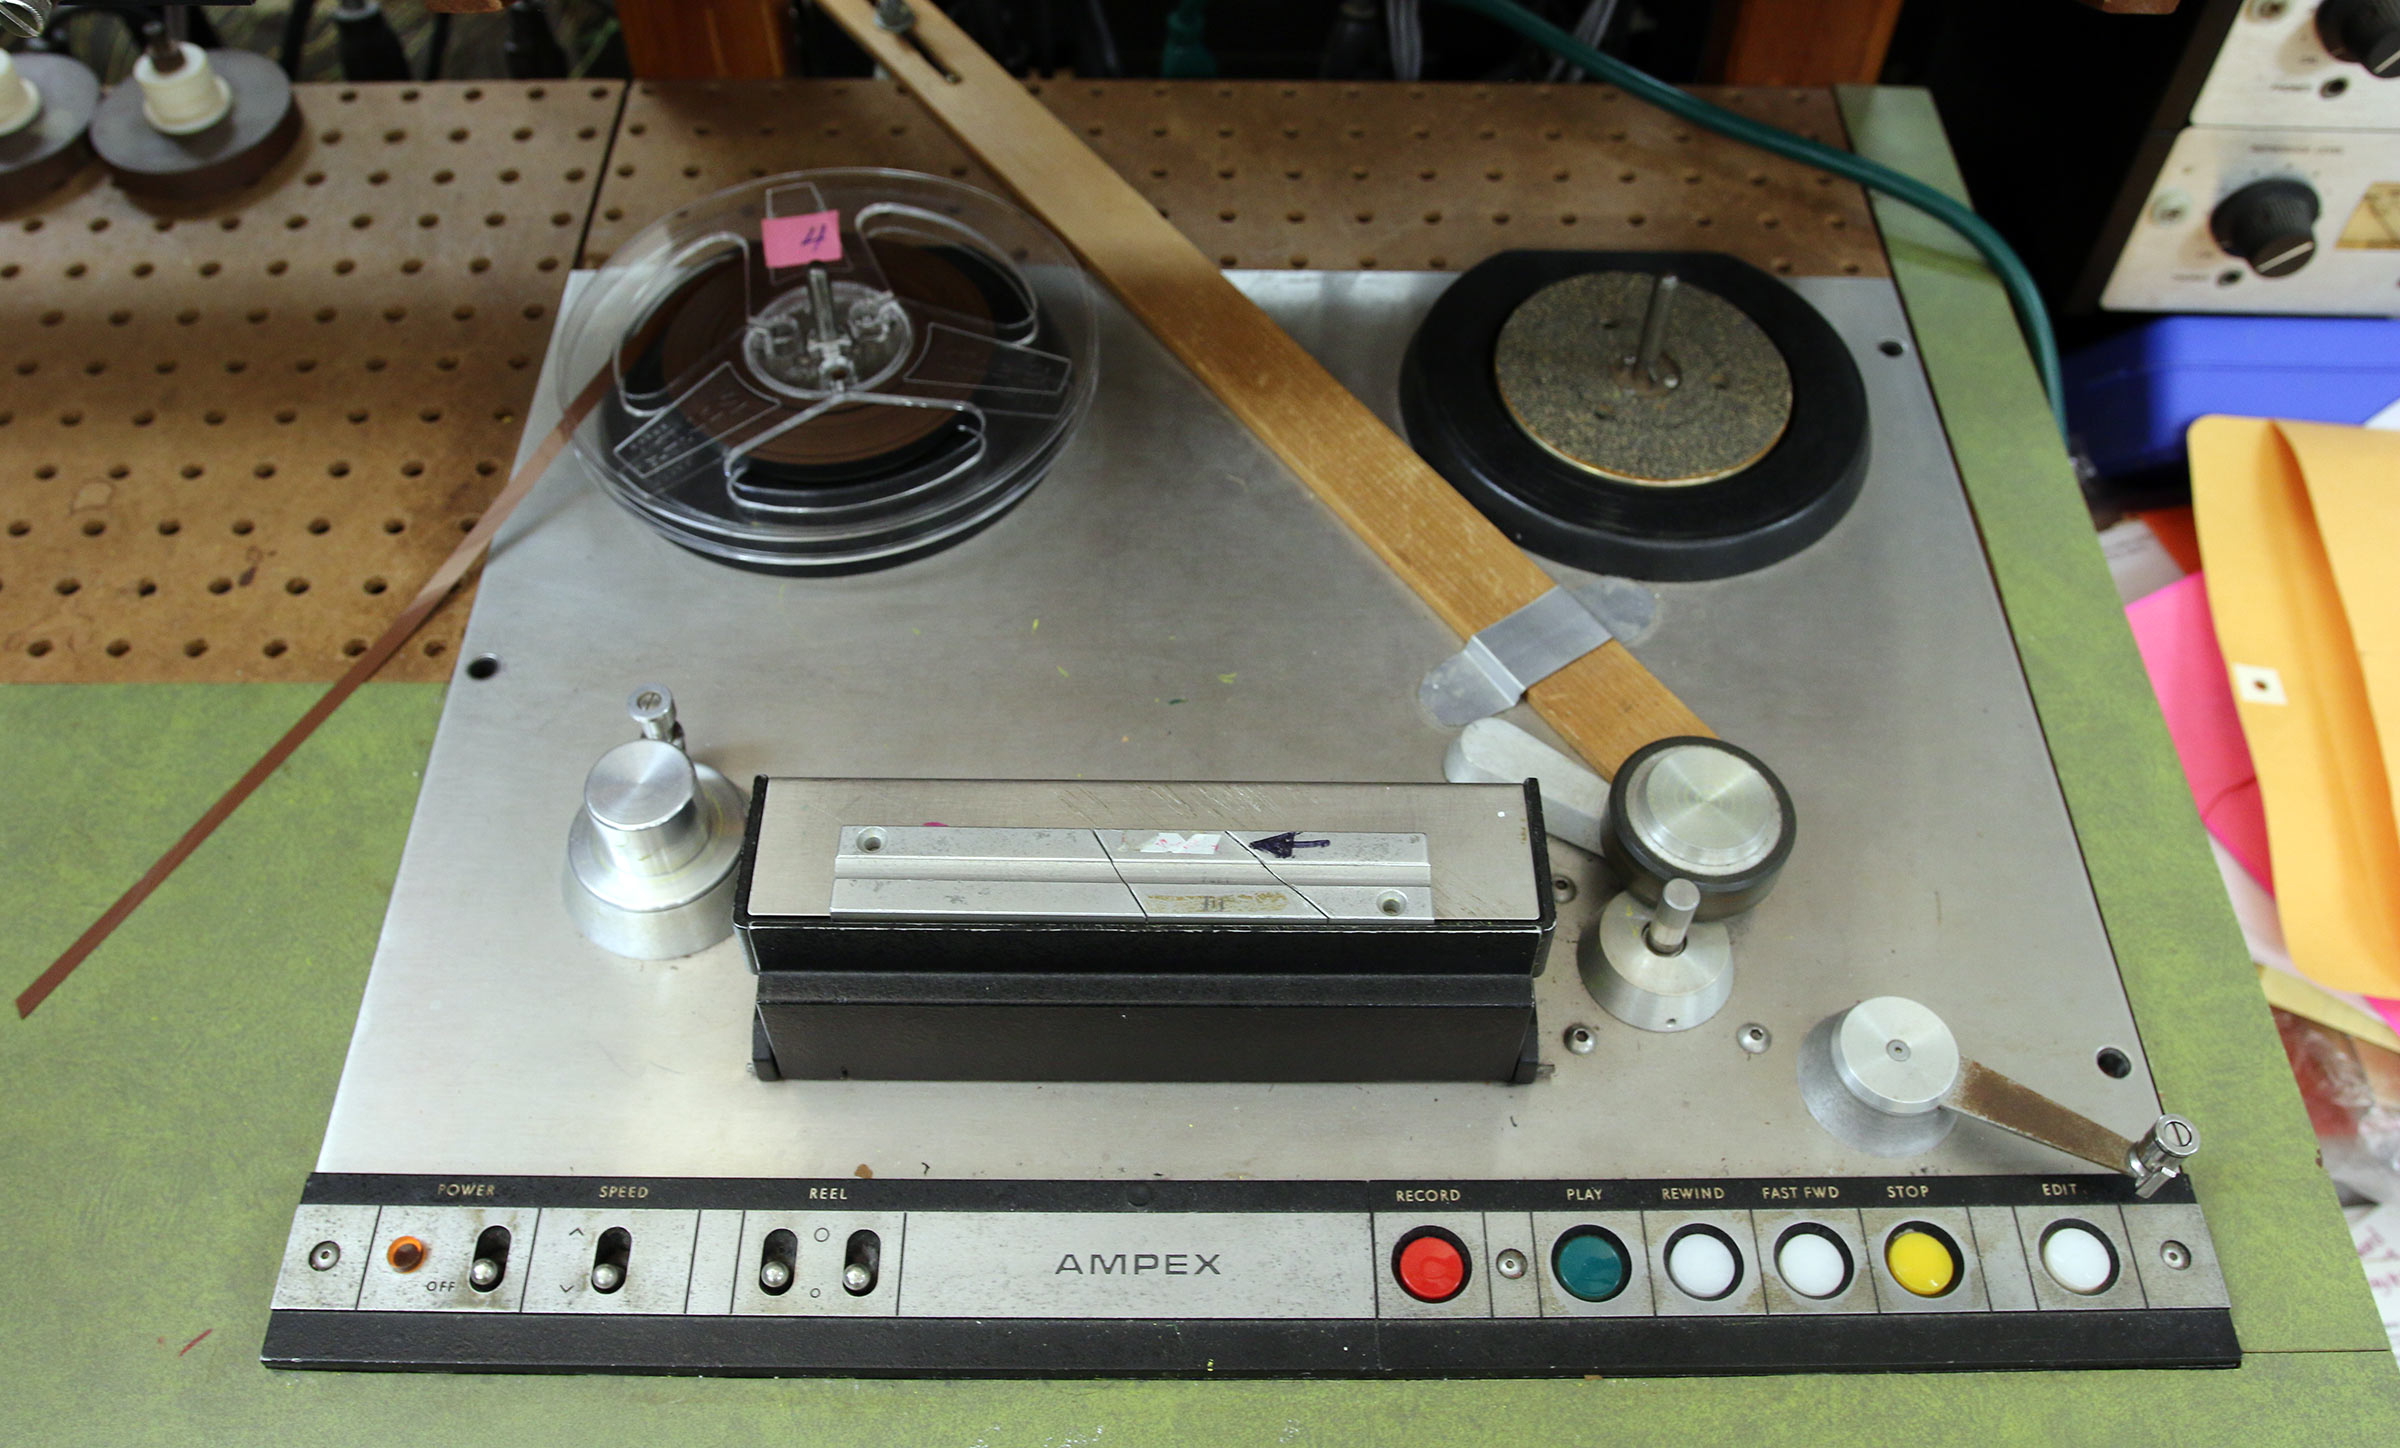 Daria Semegen still manipulates sound using reel-to-reel tapes and teaches her students to do so as well. And, after more than a half century of experience, she has well-tested preferences for what the best angles are for splicing. This is why there is a slab of wood positioned on this reel-to-reel machine (one of four at her Electronic Music Studio at Stony Brook University) which enables people working with the tape deck to precisely eyeball where to position a razor blade in order to make a splice on the tape.